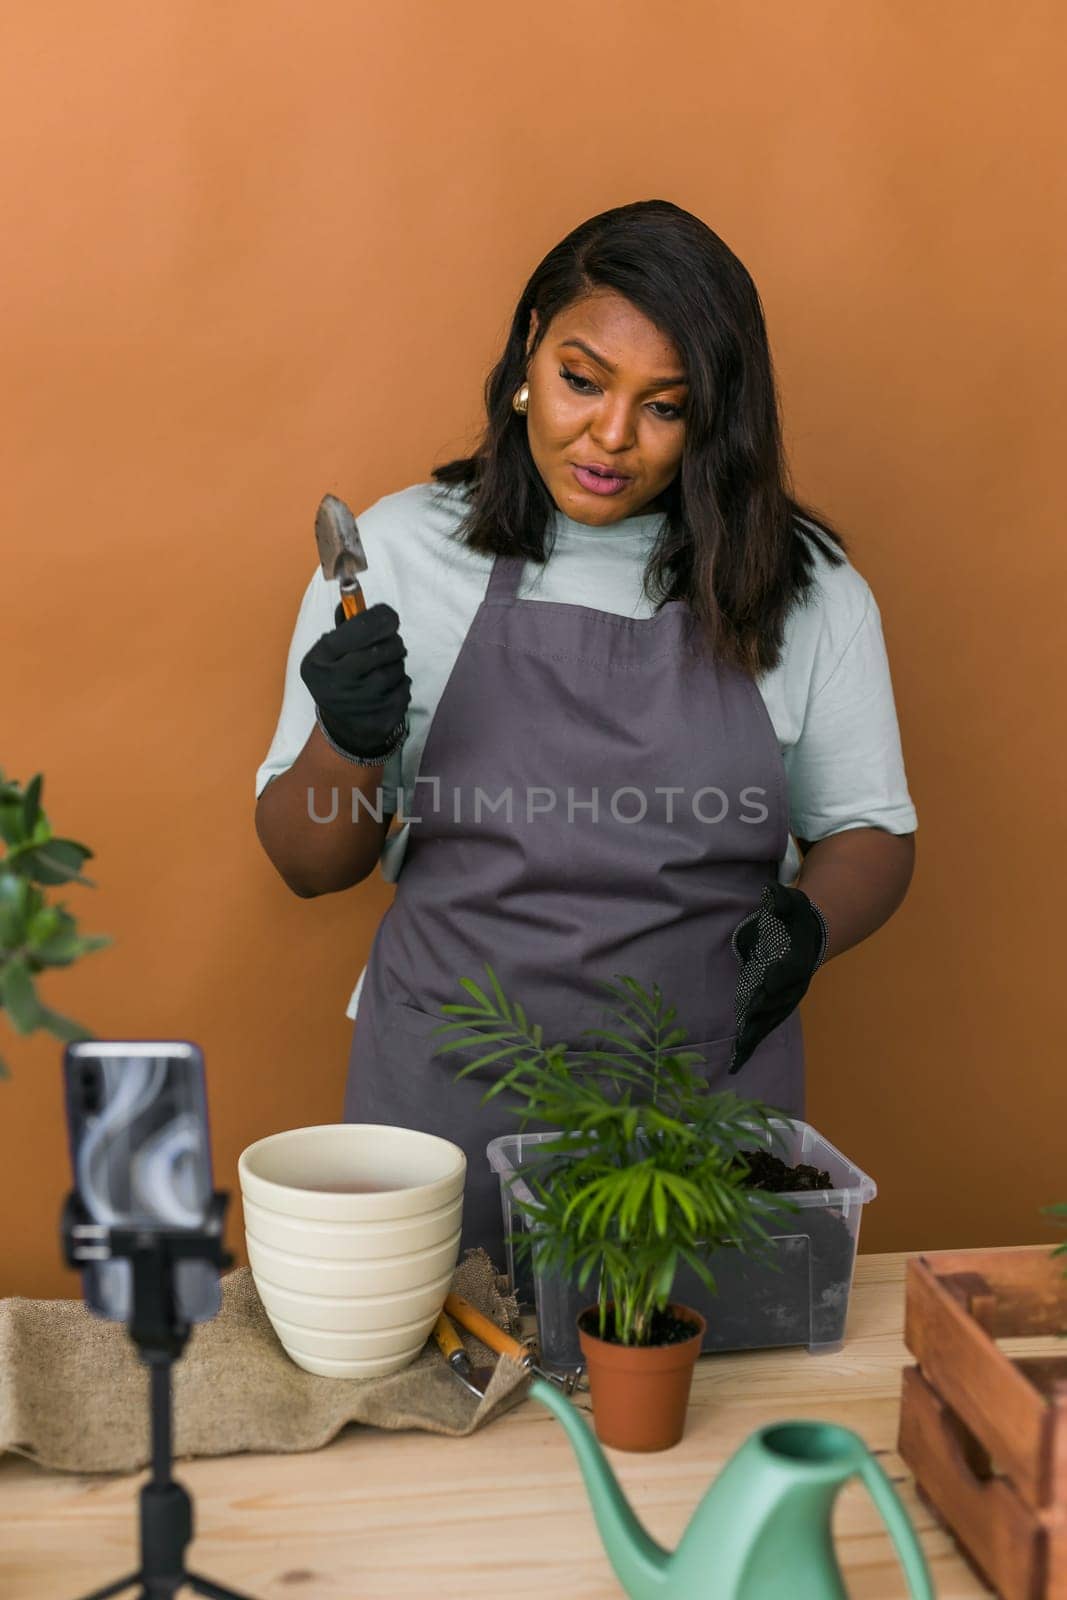 African american florist blogger filming tutorial video about transplanting plants in home garden. Make video vlog with mobile phone by Satura86